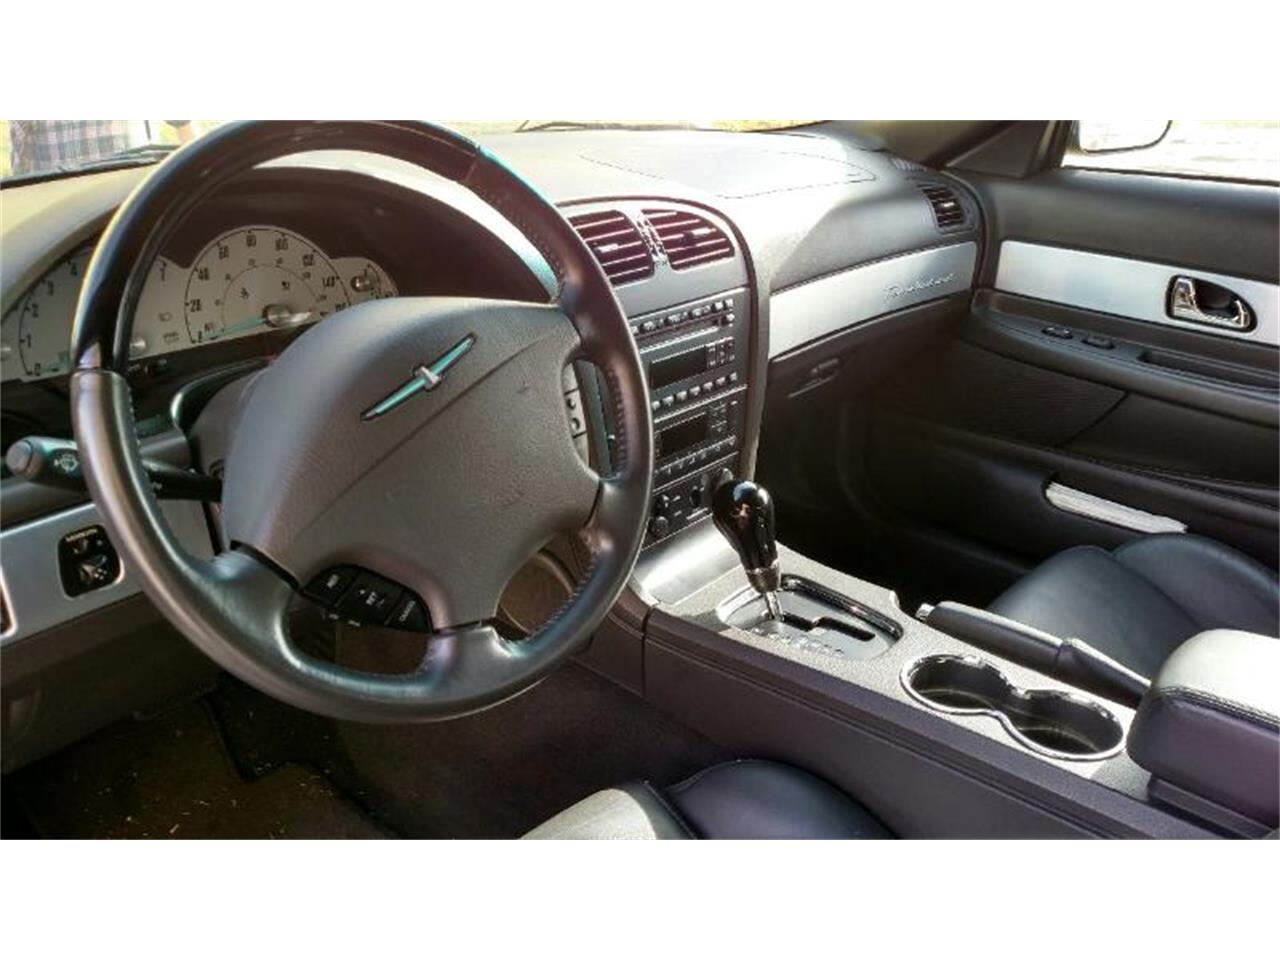 2002 Ford Thunderbird for sale in Sevierville, TN – photo 3